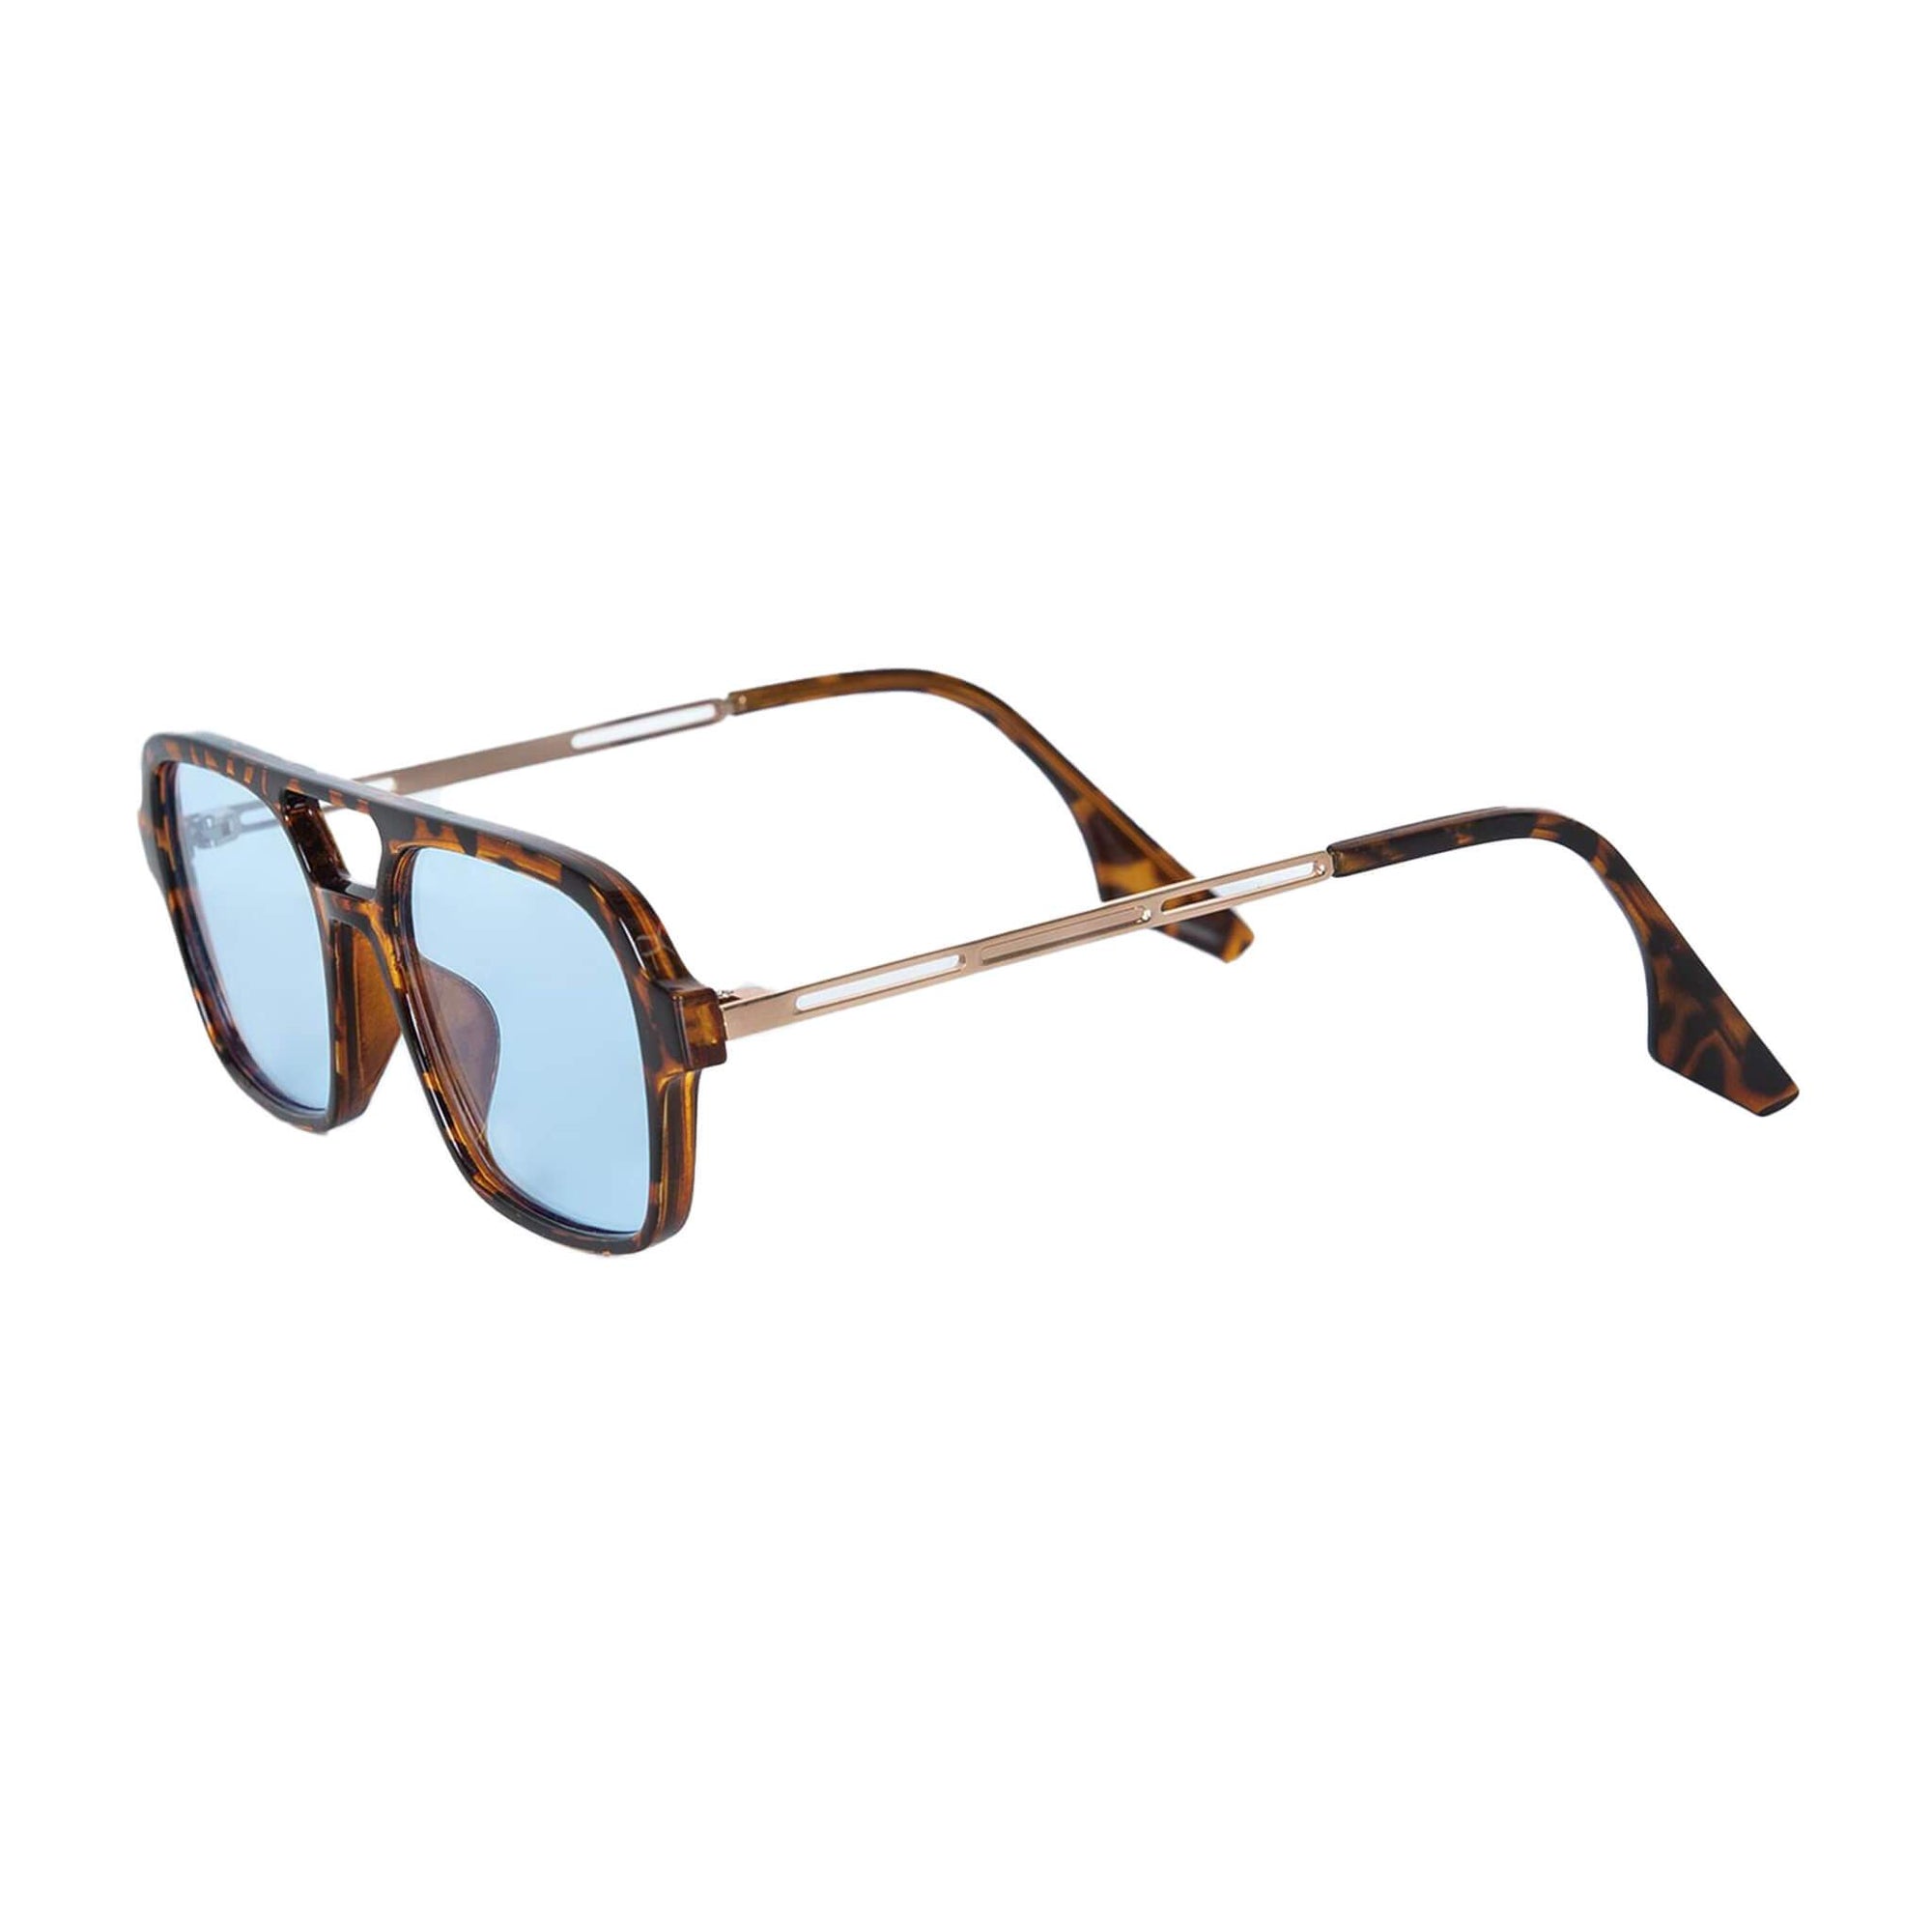 Wide Aviator Sunglasses with Blue Lens Front